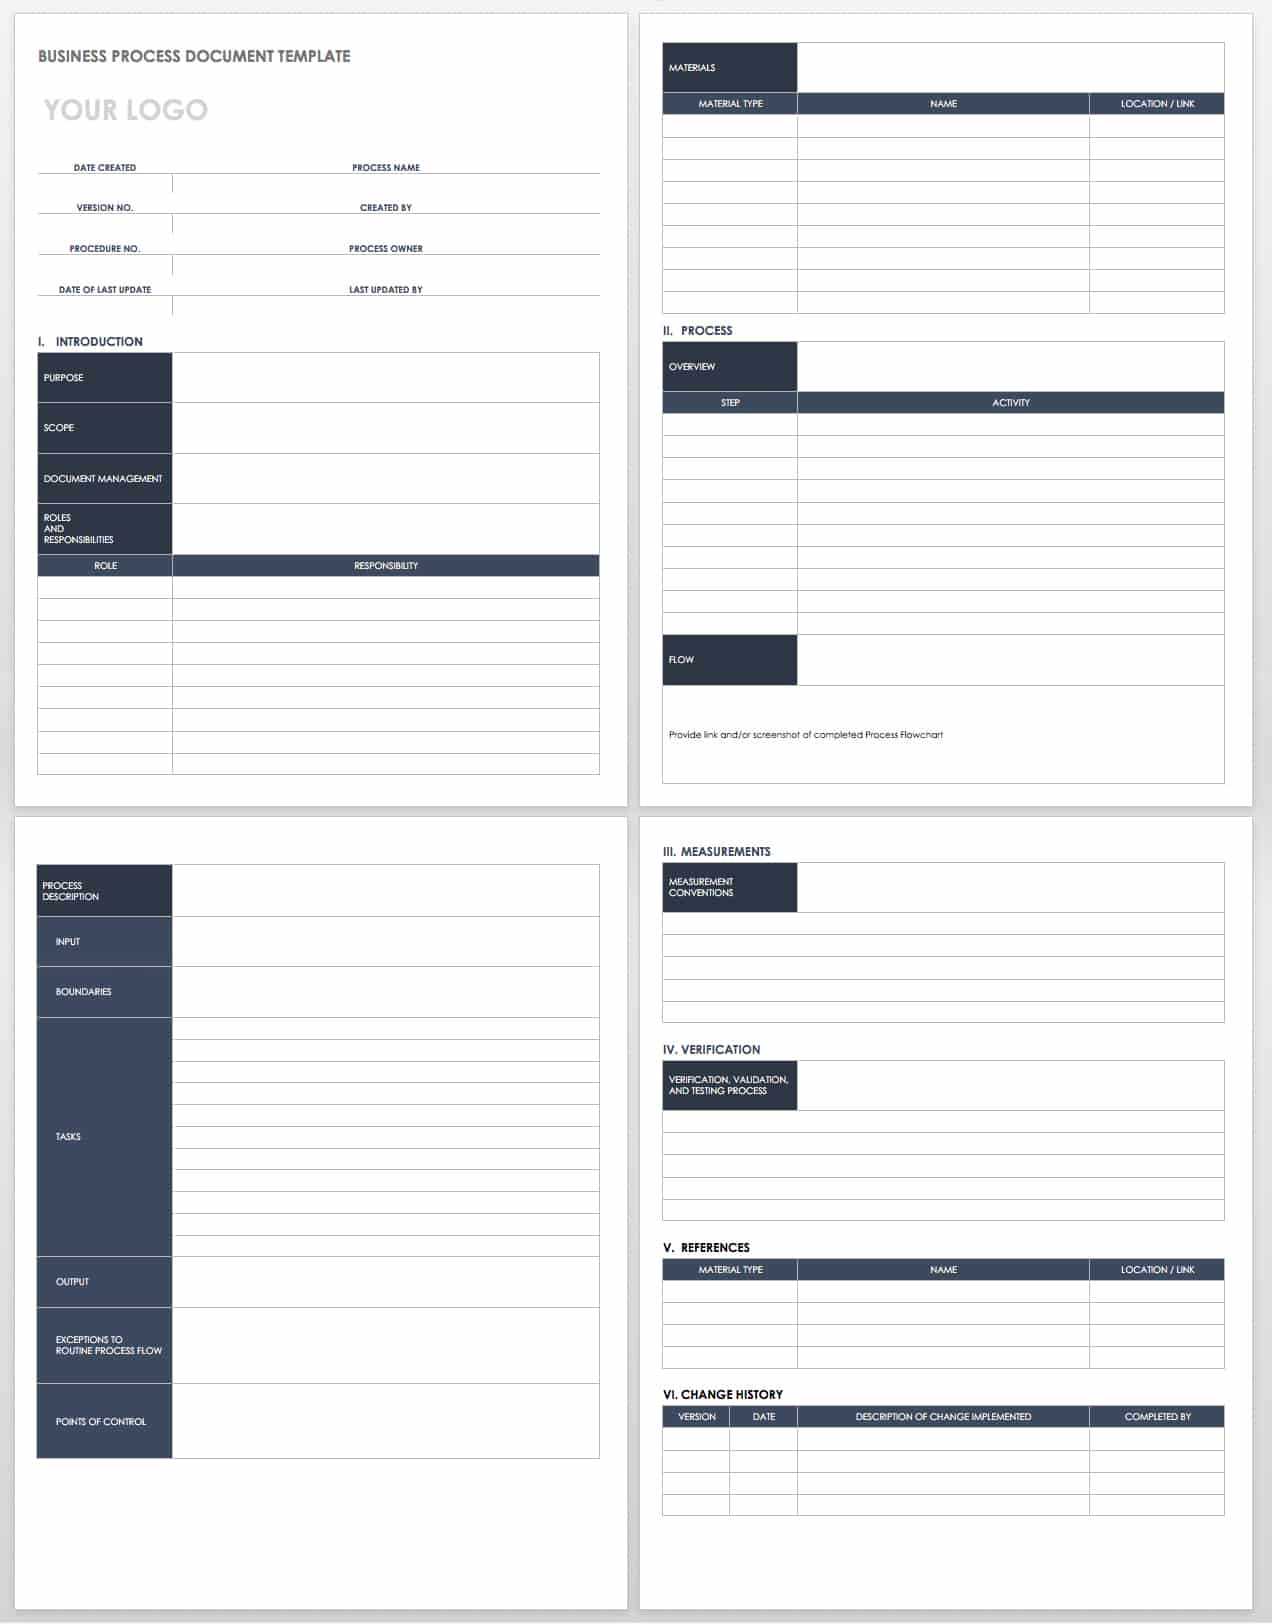 Free Process Document Templates | Smartsheet For Free Document Templates For Business